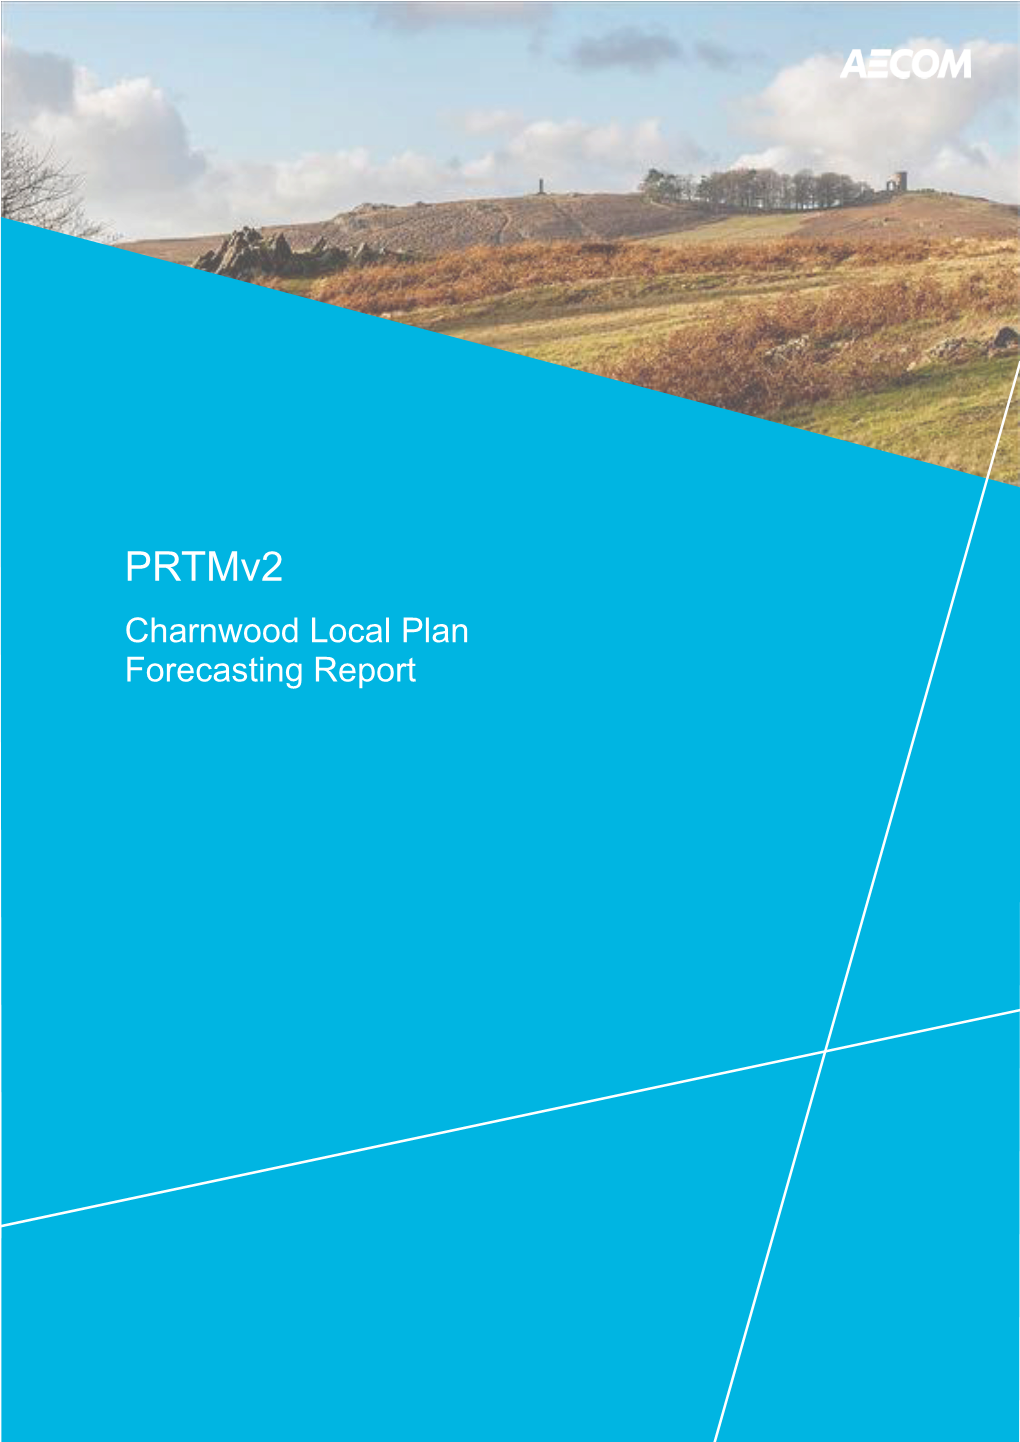 Charnwood Local Plan Forecasting Report